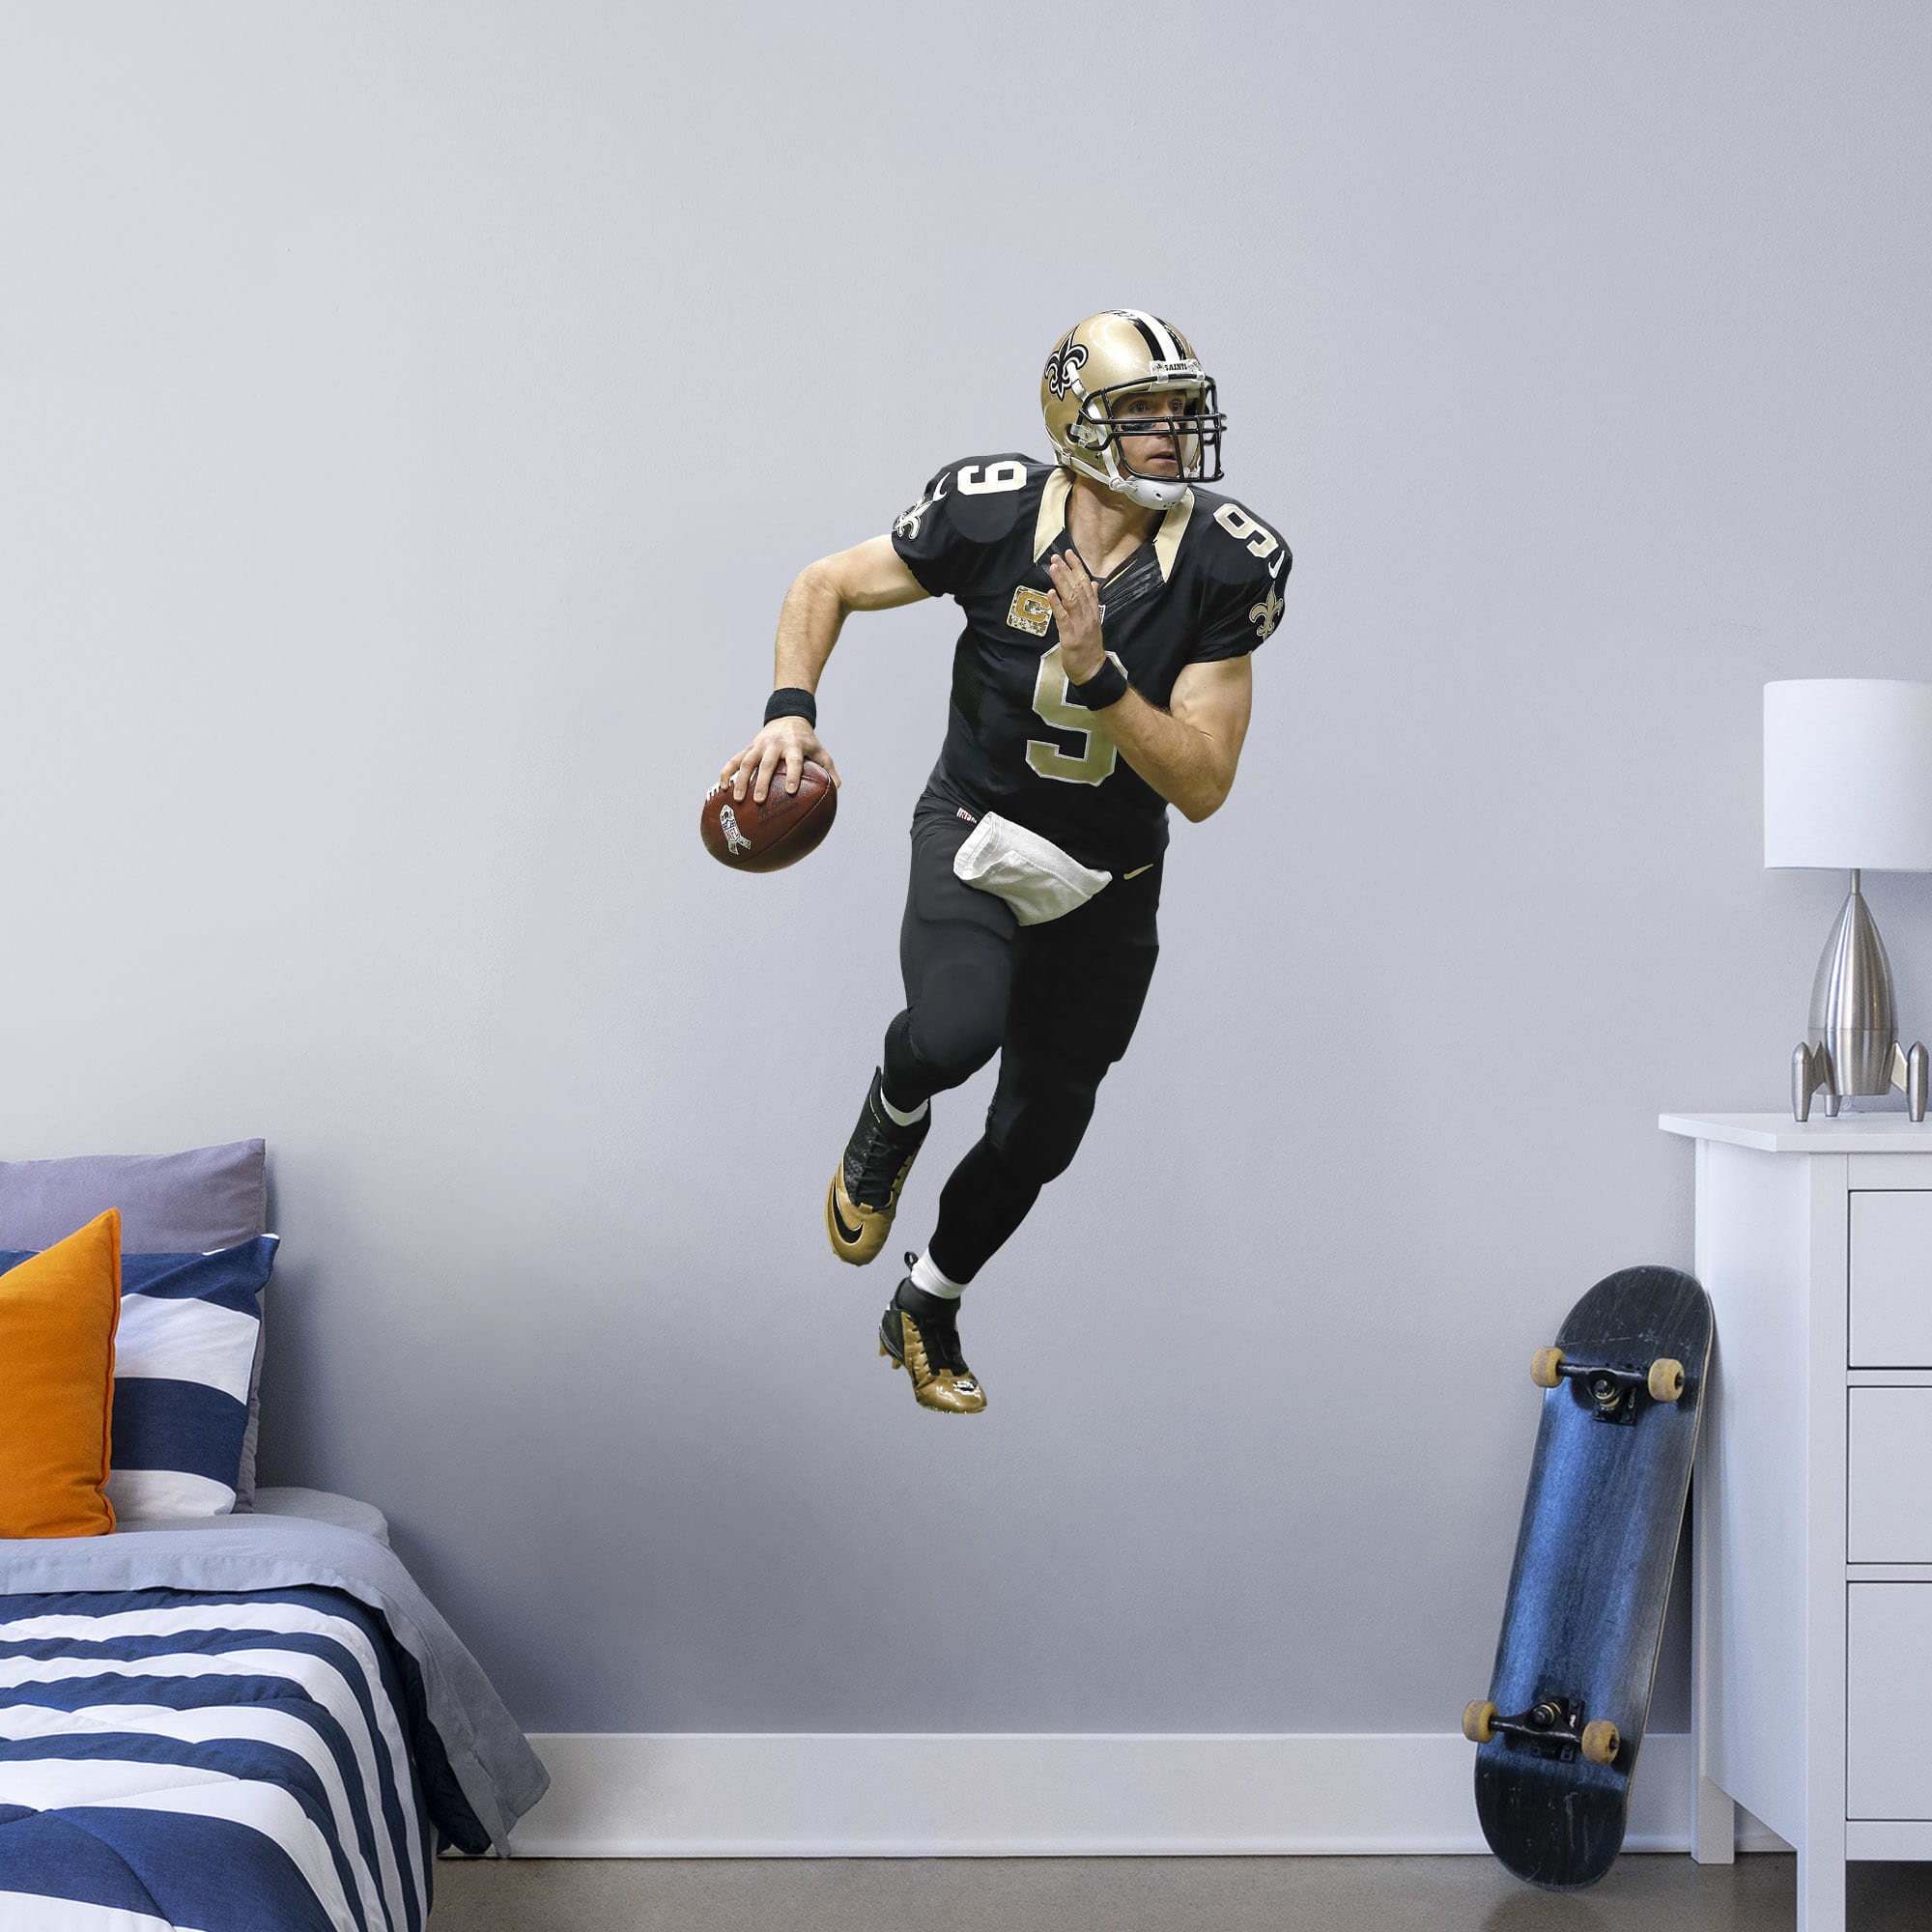 Drew Brees for New Orleans Saints: Home - Officially Licensed NFL Removable Wall Decal Giant Athlete + 1 Decals (20"W x 51"H) by